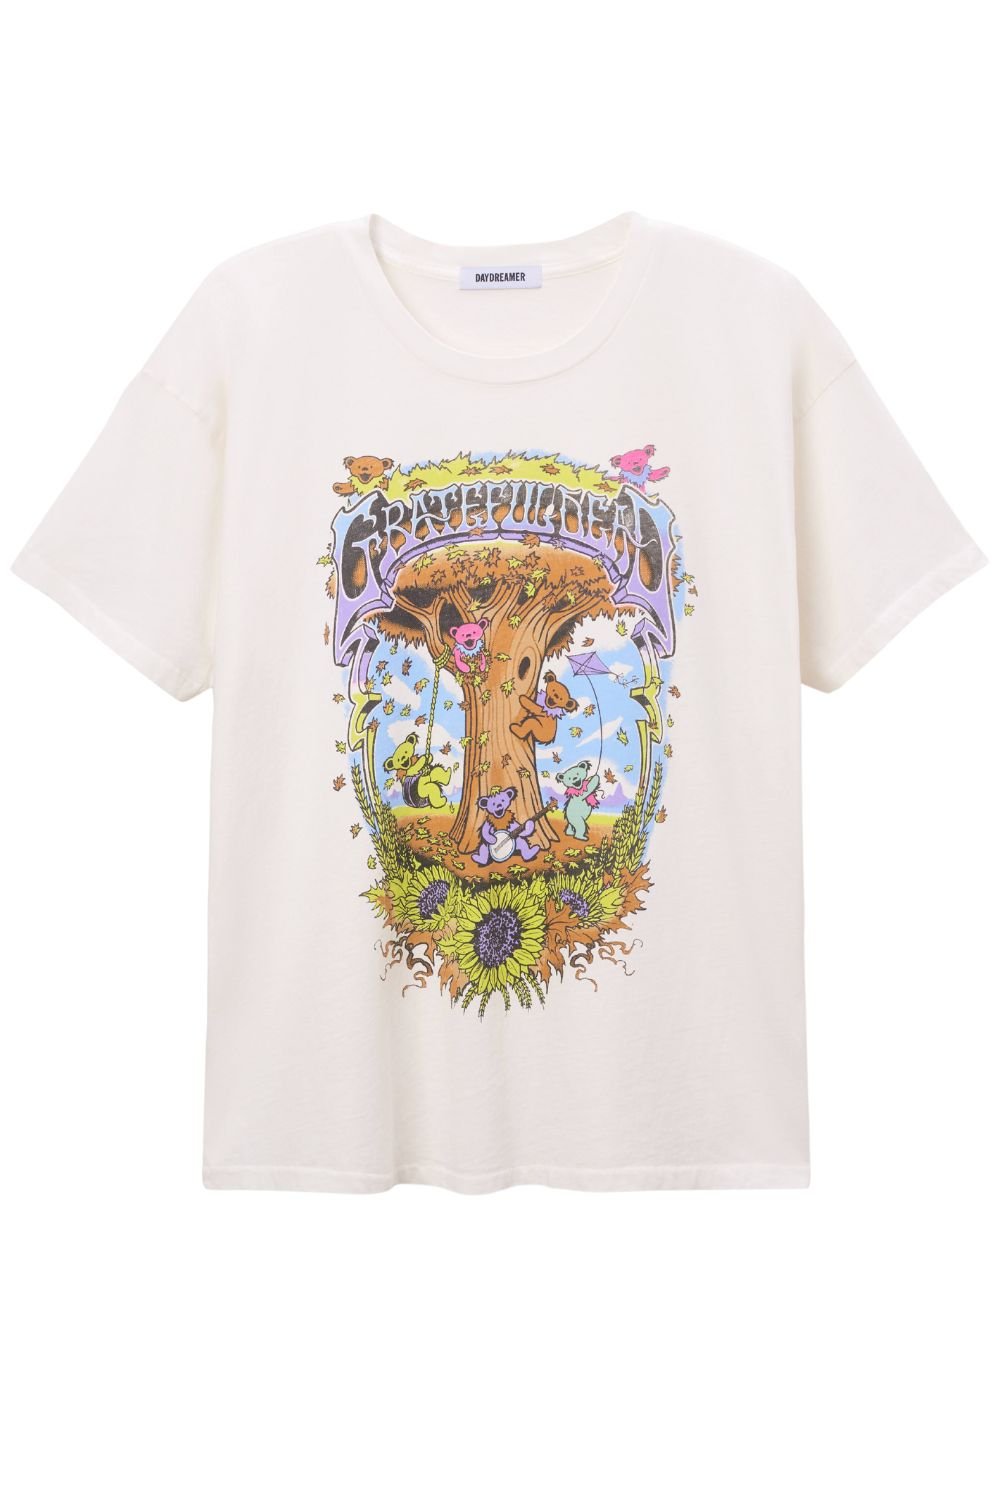 Daydreamer Graphic Tee | Grateful Dead Bears | Merch T-Shirt - Unisex Shirts &amp; Tops - Blooming Daily